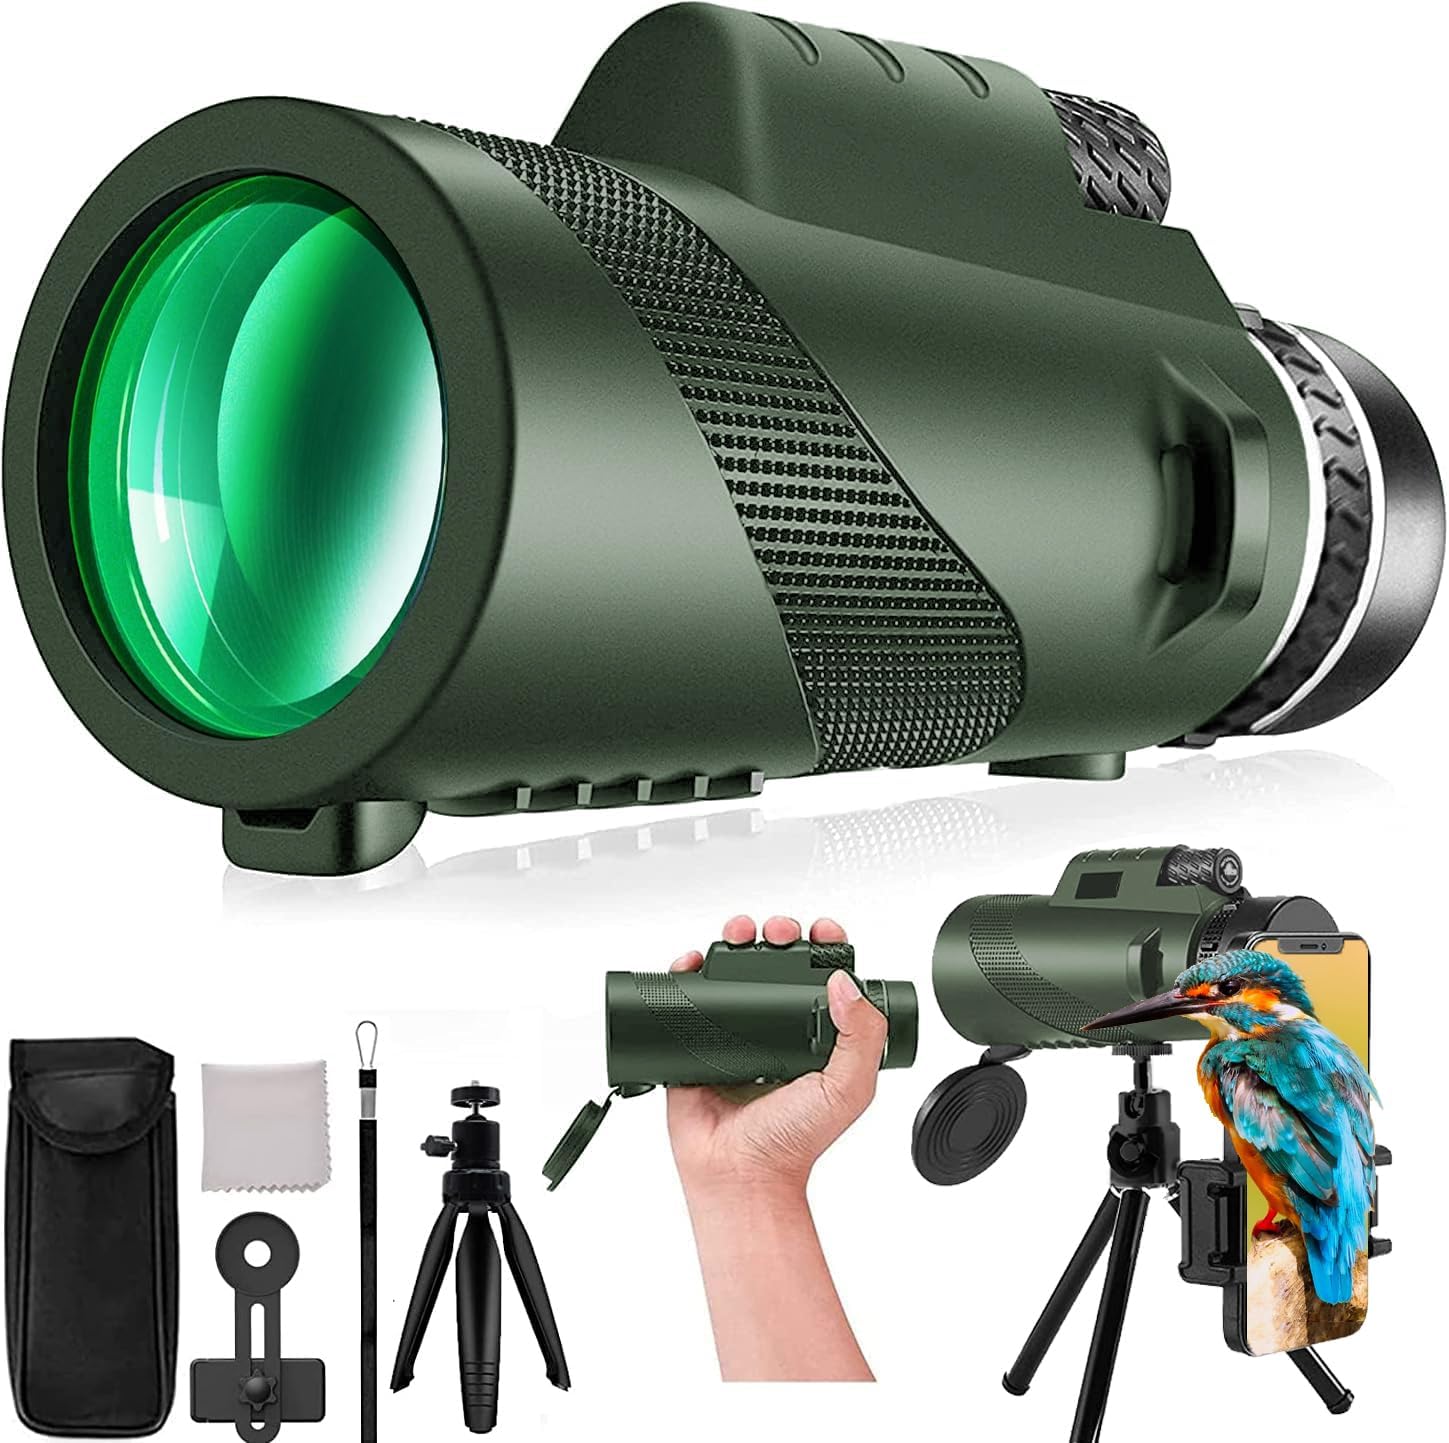 80x100 HD Monocular Telescope with Smartphone - High Power Monocular with Adapter Lightweight BAK-4 Prism  FMC Lens Monoculars for Bird Watching Stargazing Hunting Camping Hiking Travel